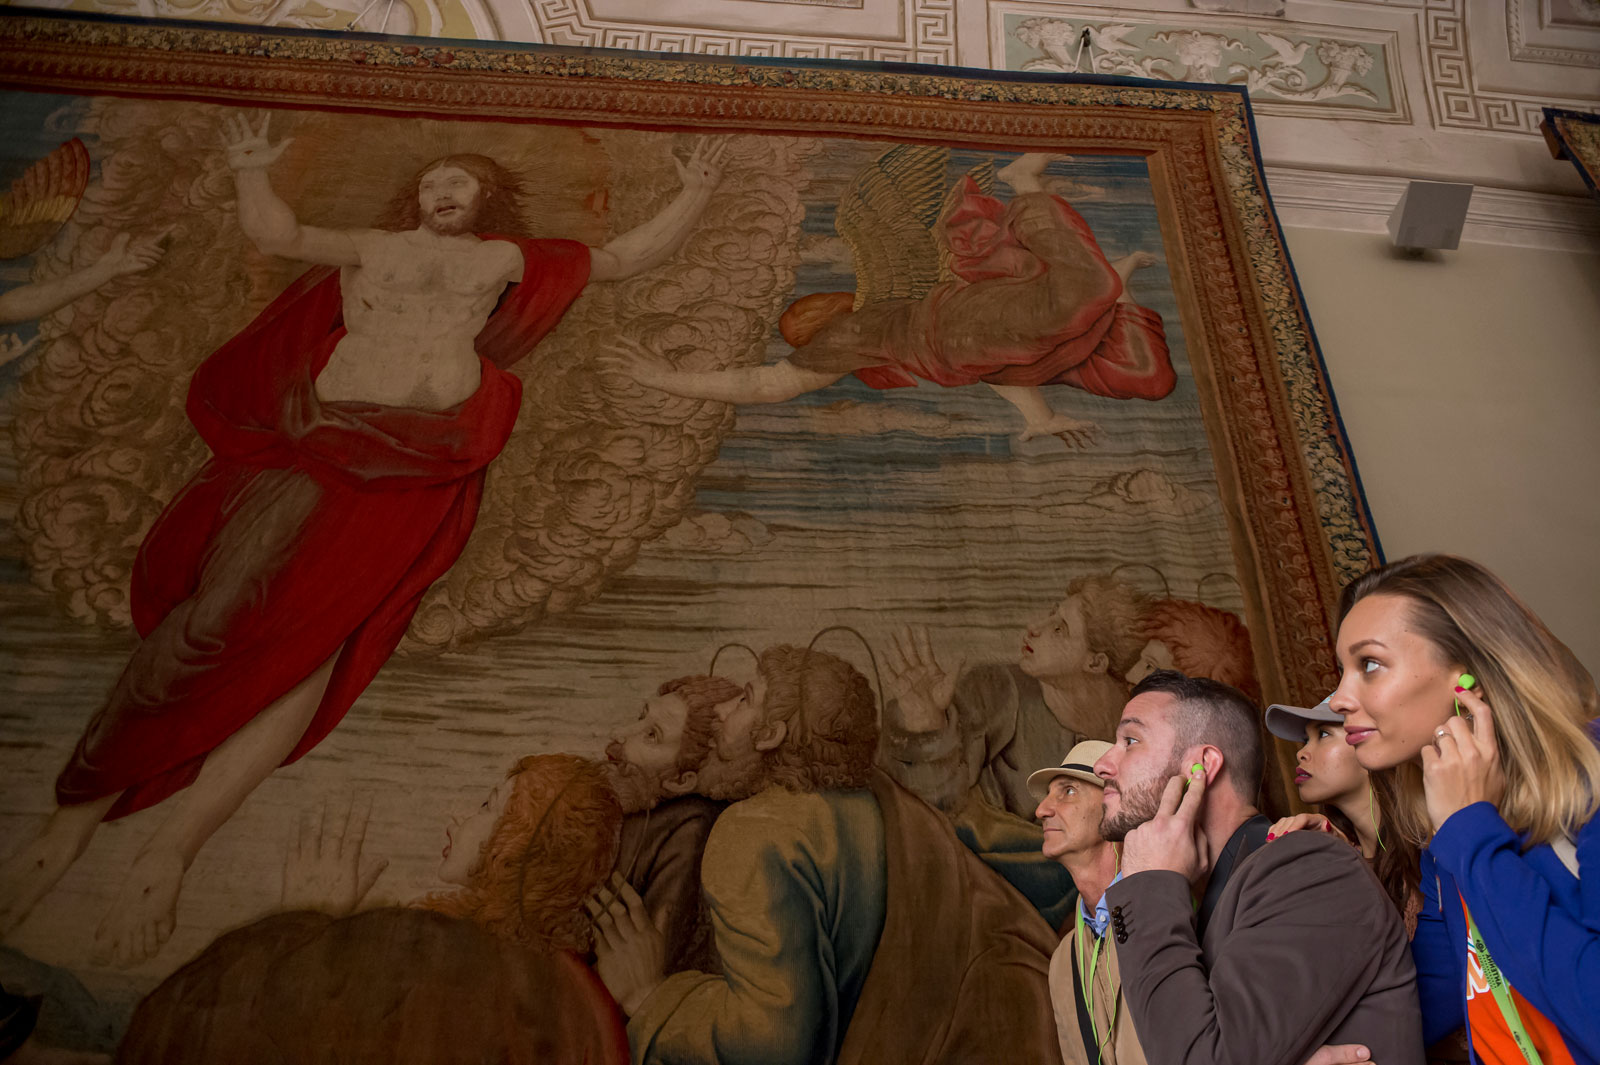 Vatican Museums and Sistine Chapel